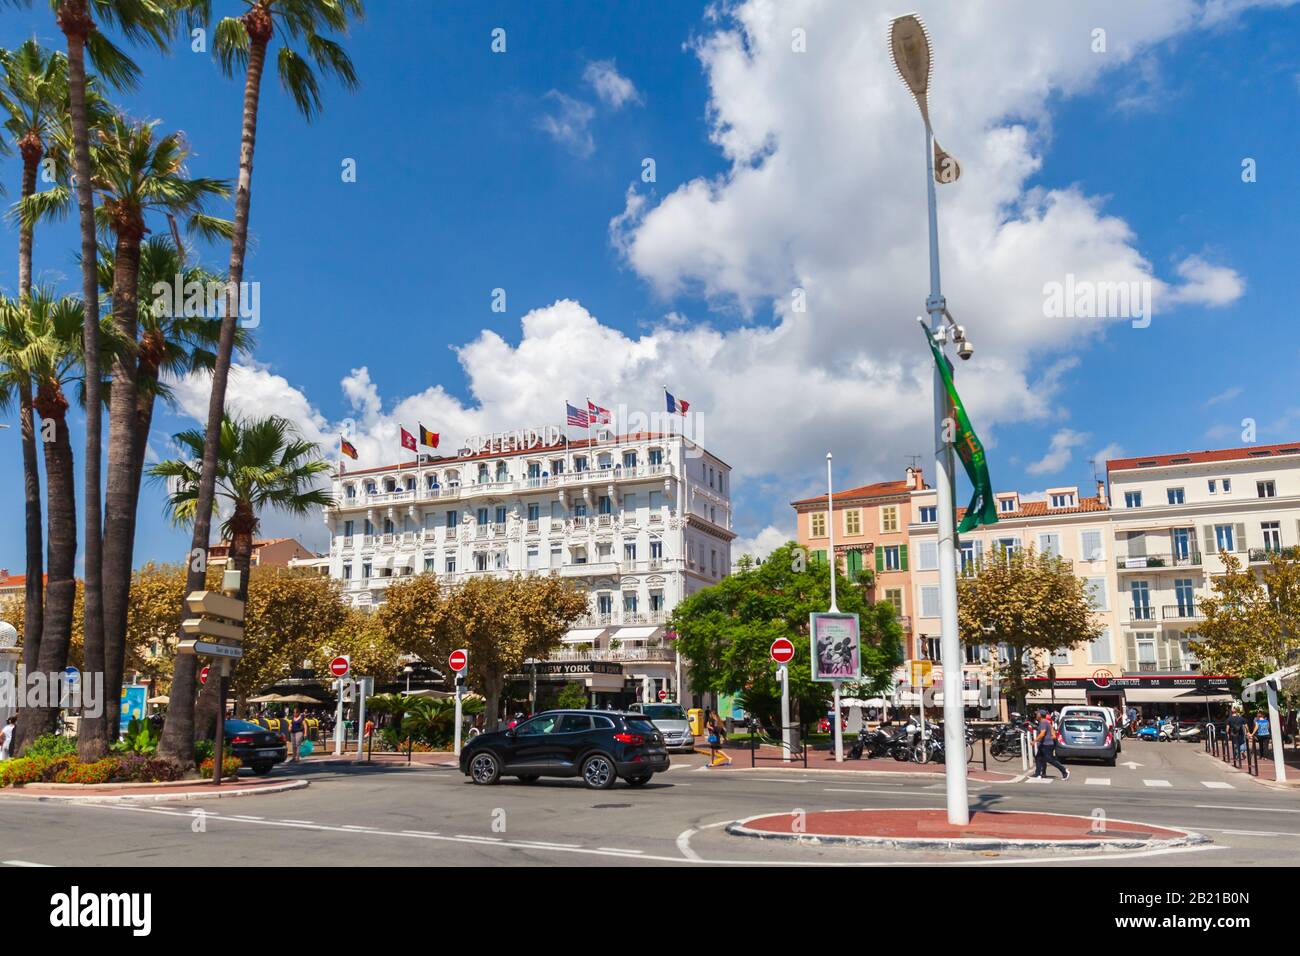 Cannes, France - August 14, 2018: Boulevard de la Croisette, street view of Cannes at sunny summer day. Ordinary people walk the street near Hotel Spl Stock Photo